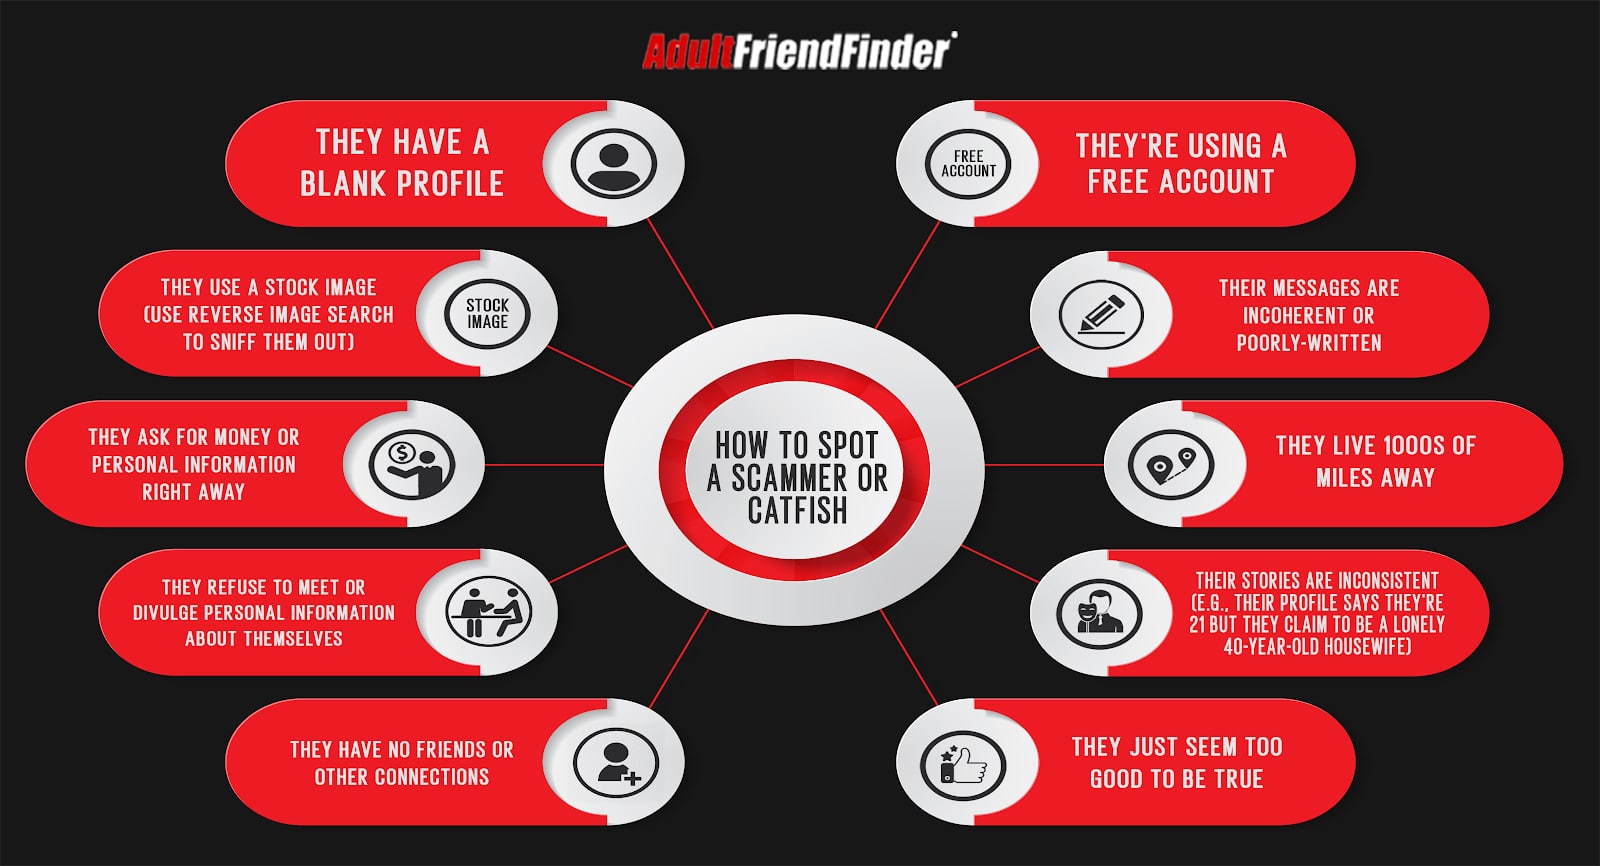 AdultFriendFinder Review — Is AFF Legit or a Waste of Time? I spent 3 months as an AFF member, here is my review - Events image